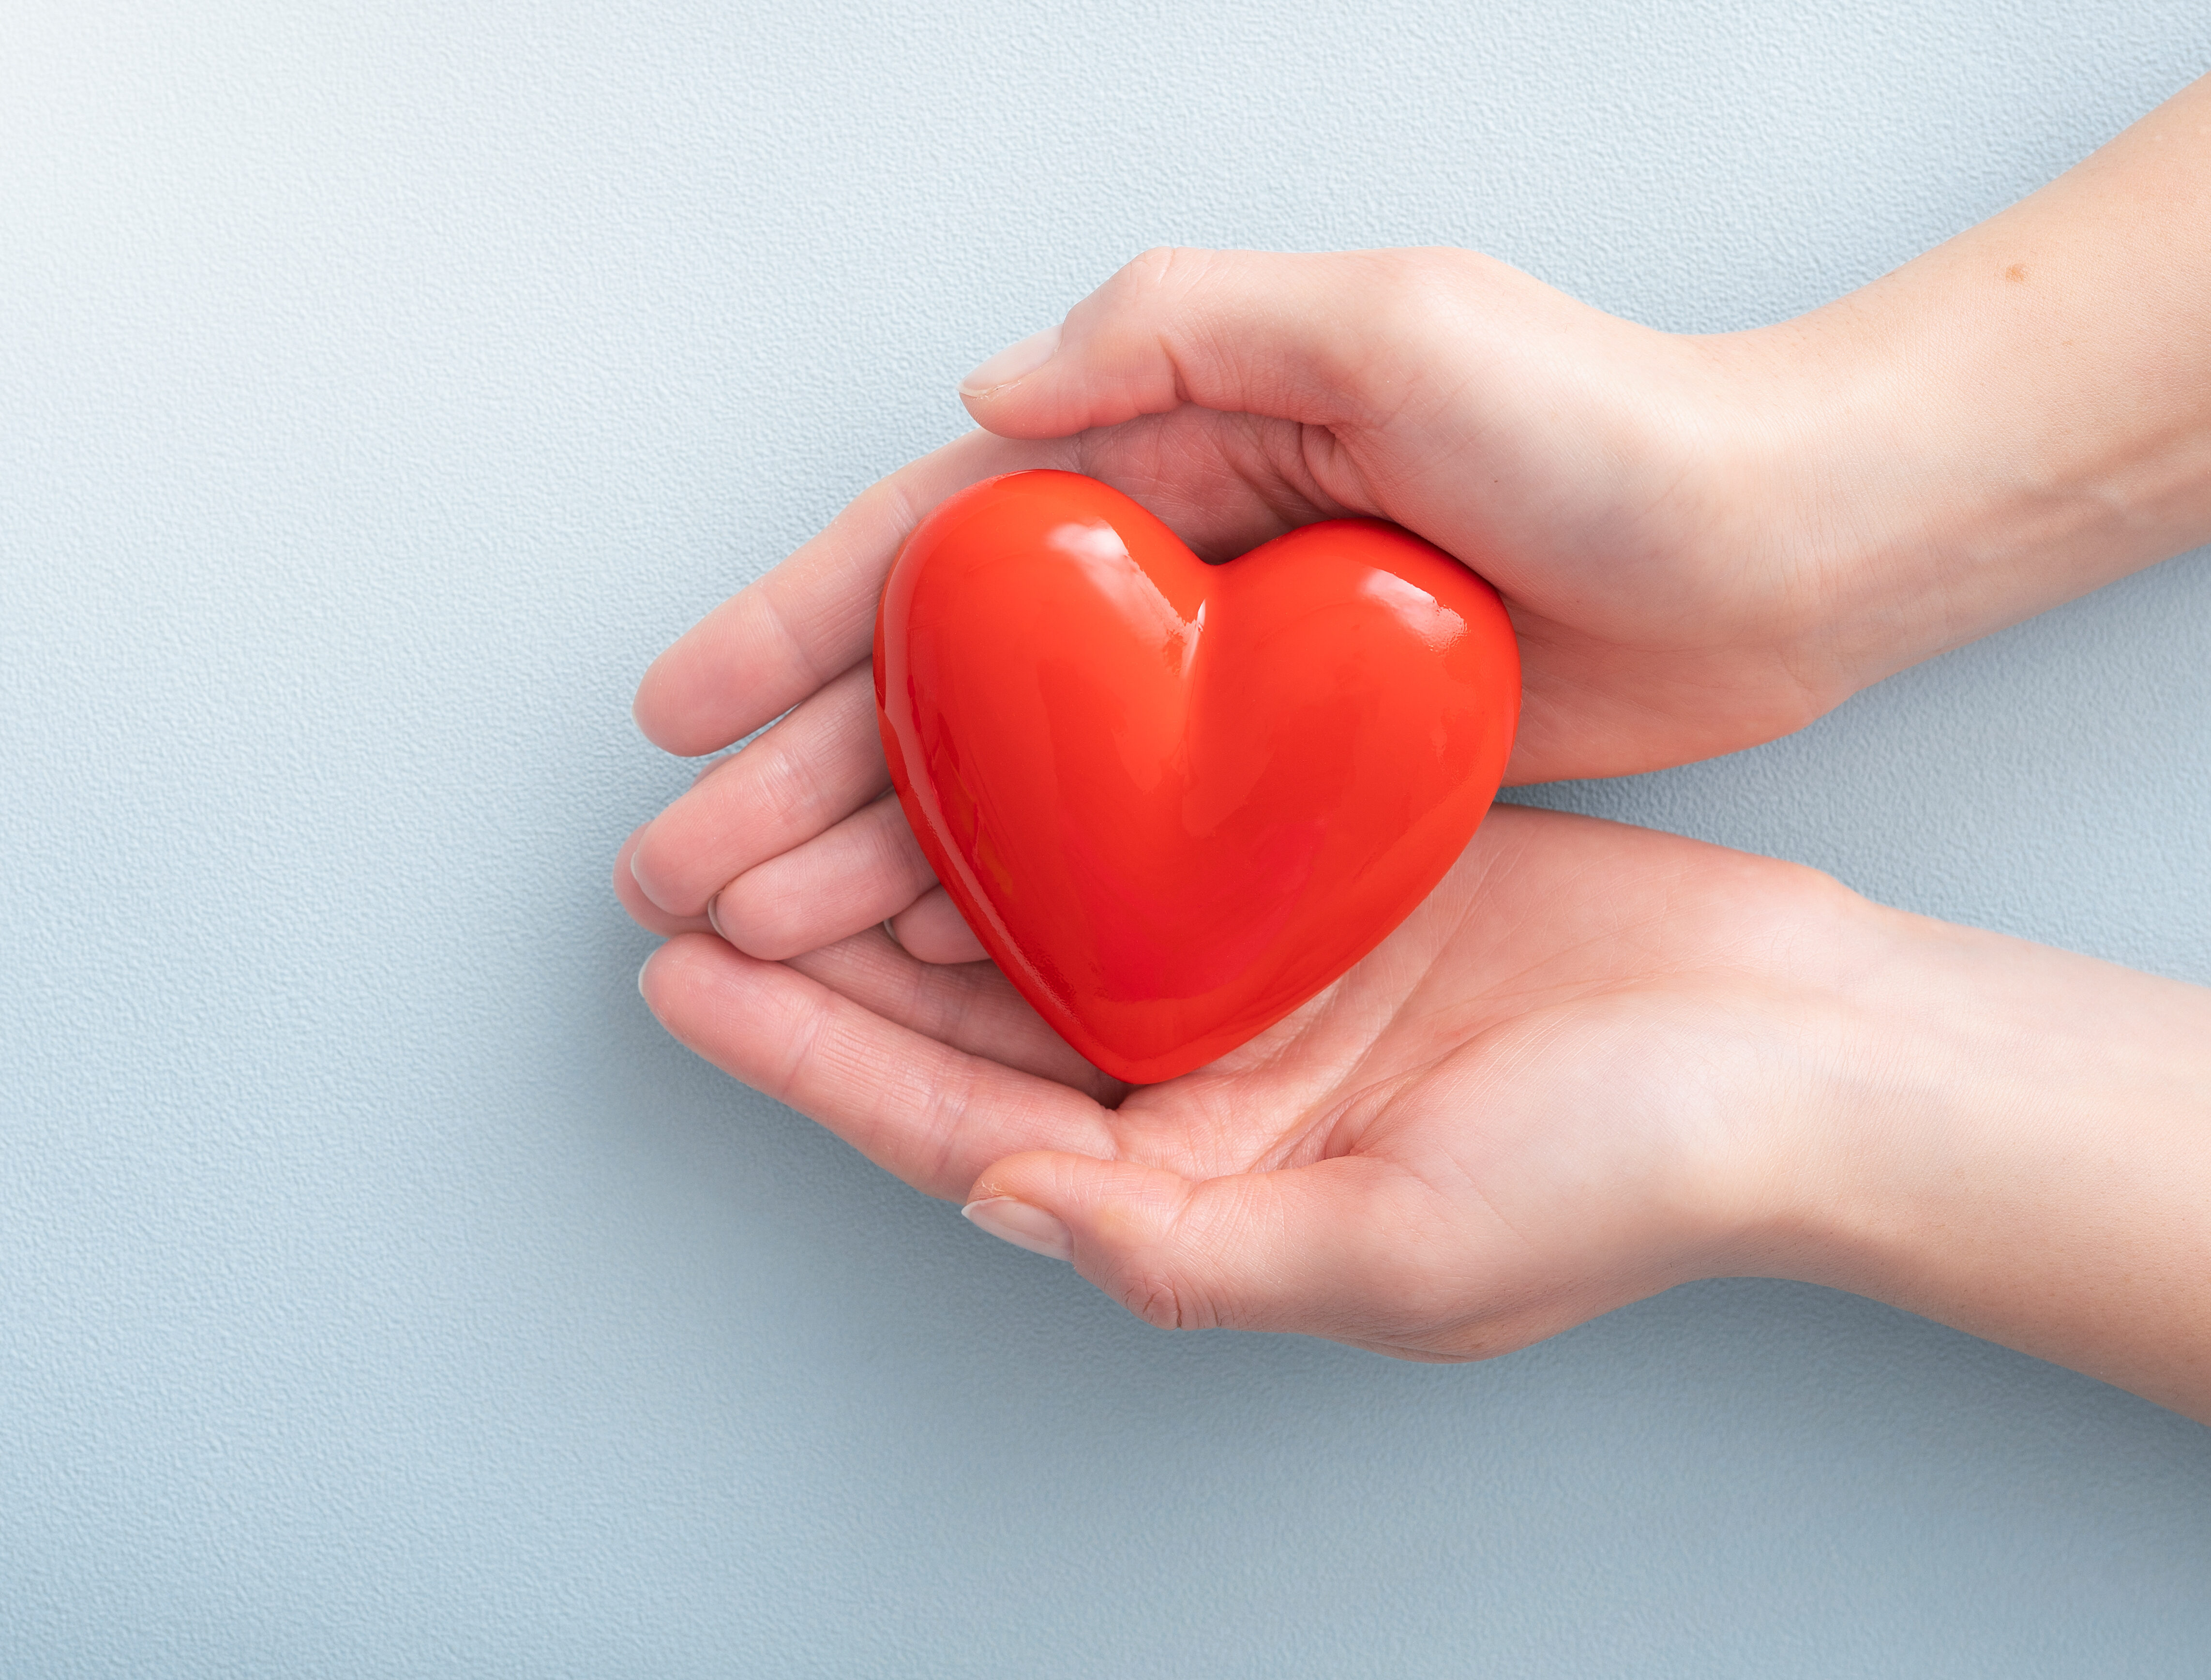 Hands are holding a red heart, symbolizing emotions in fundraising. [Let Your Heart Show]